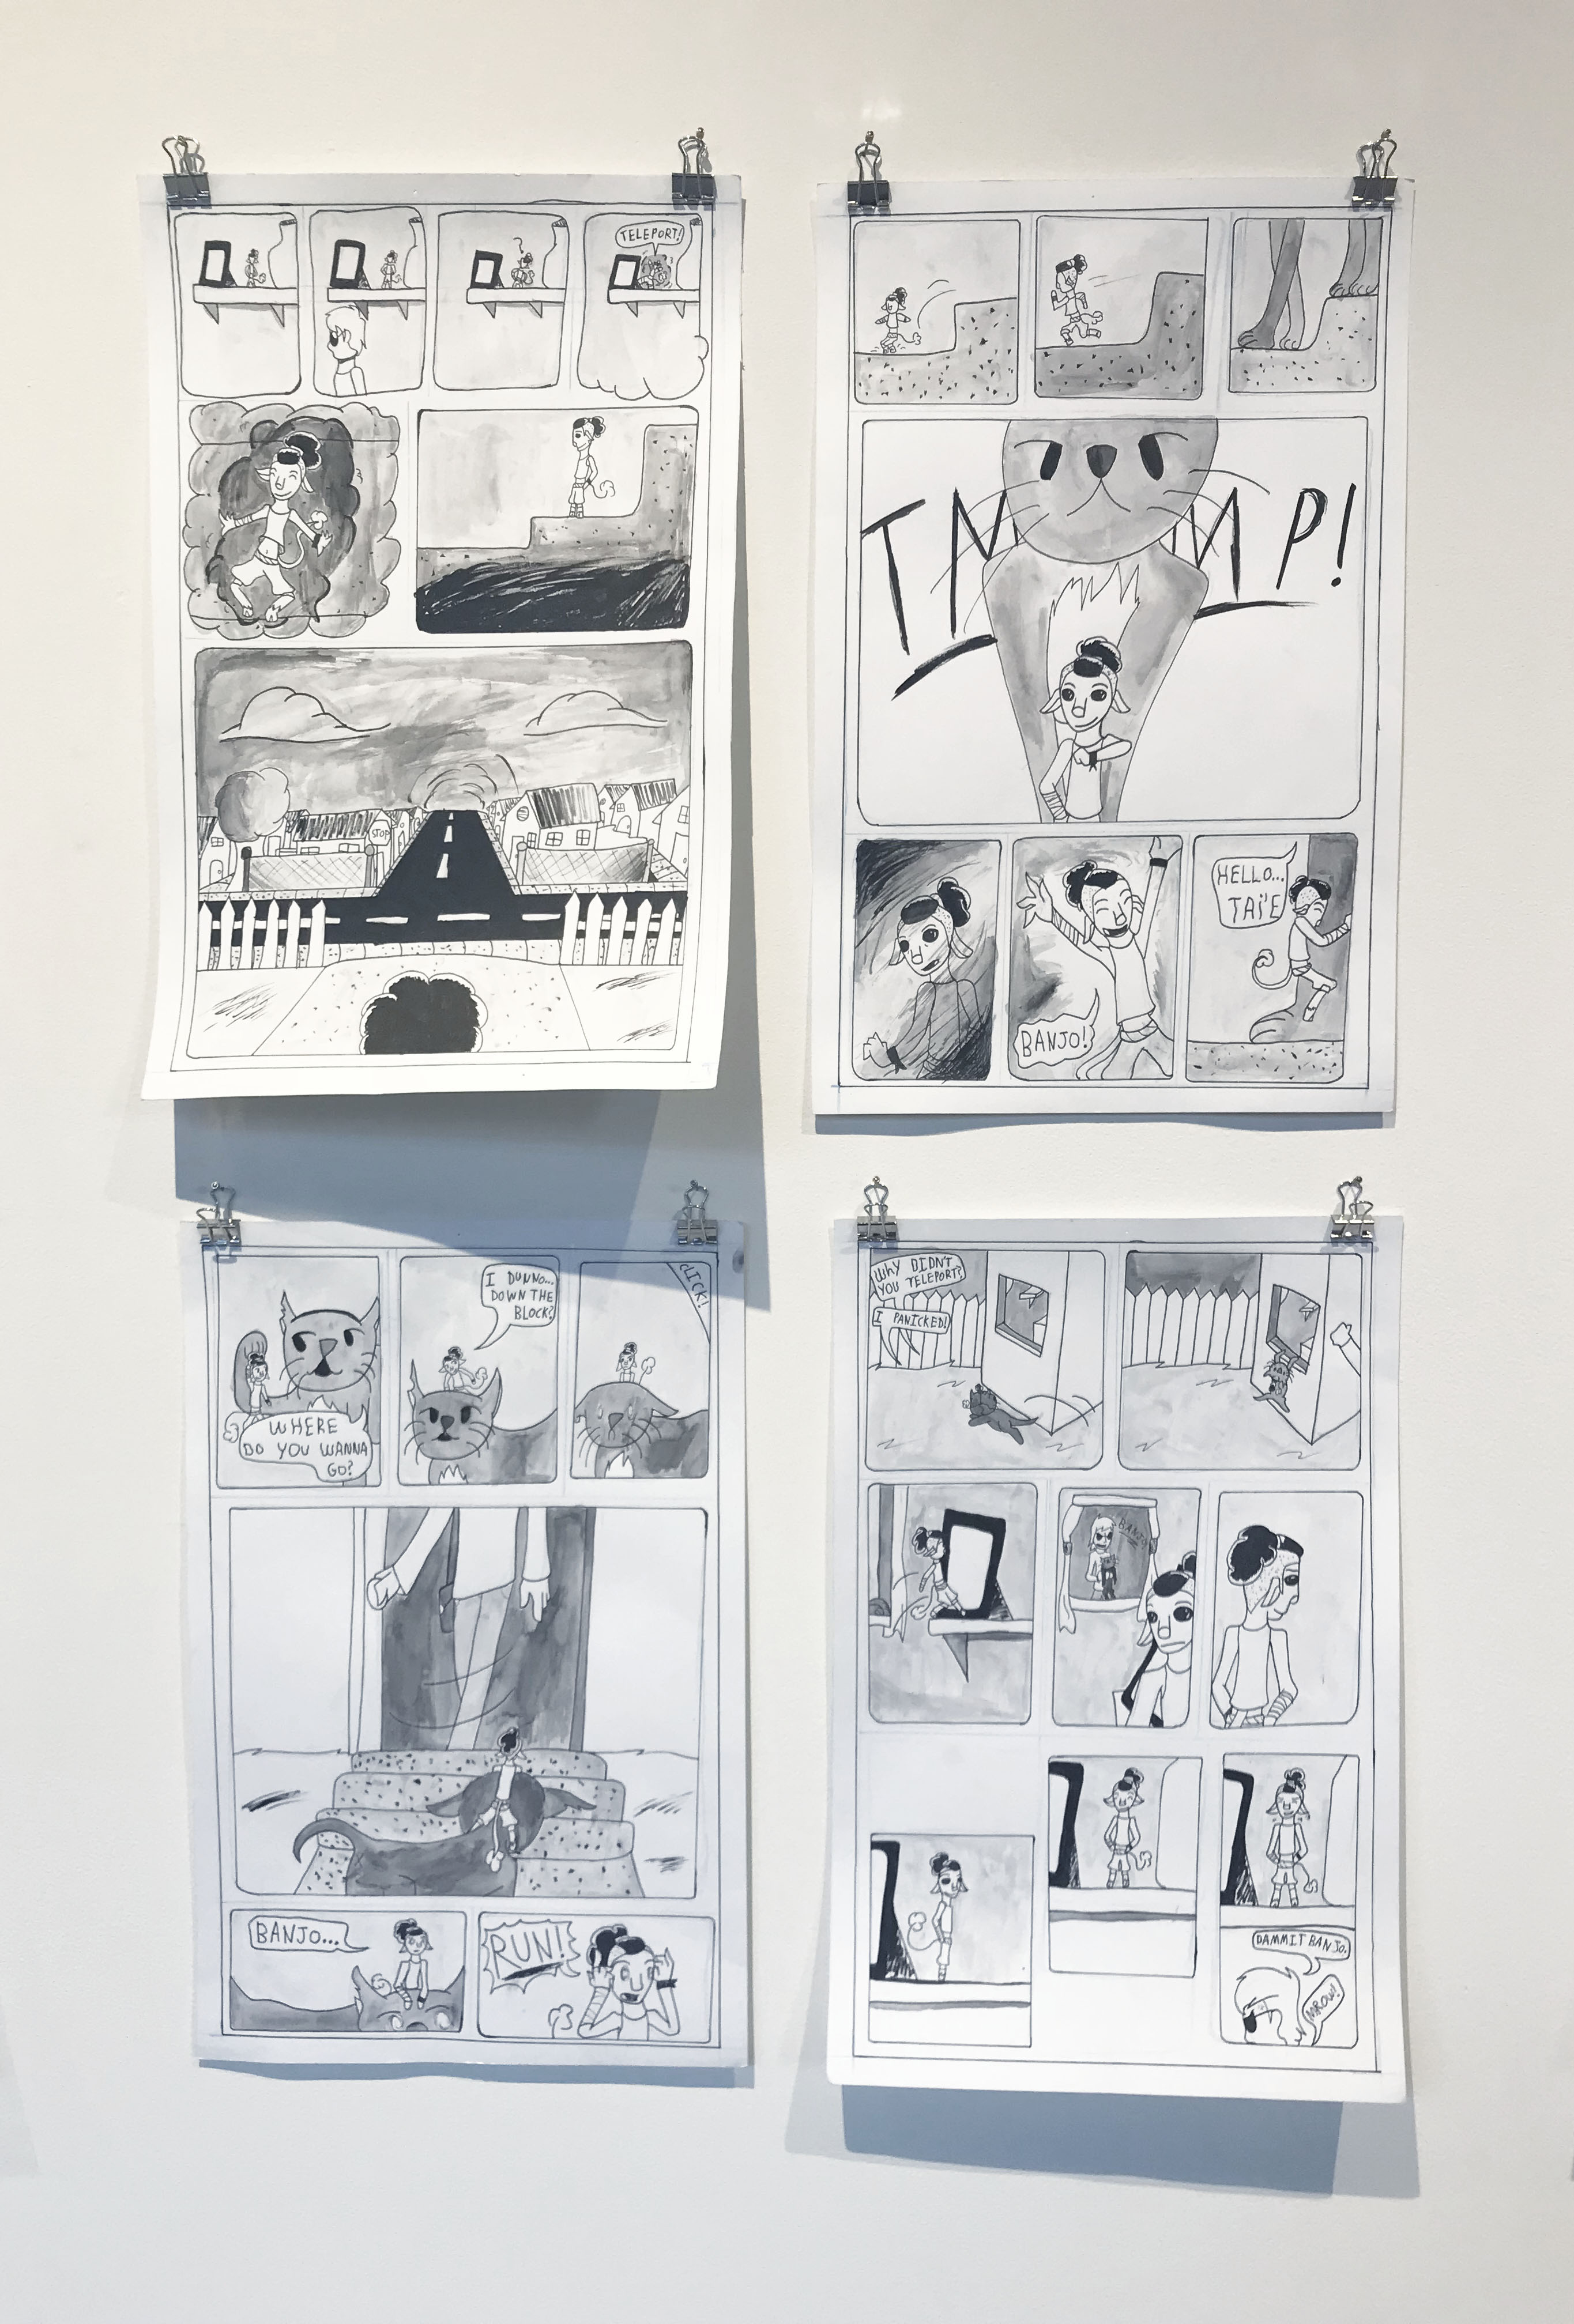 Four pen and ink drawings presented in a grid. All images are in black and white and depict comic cells.